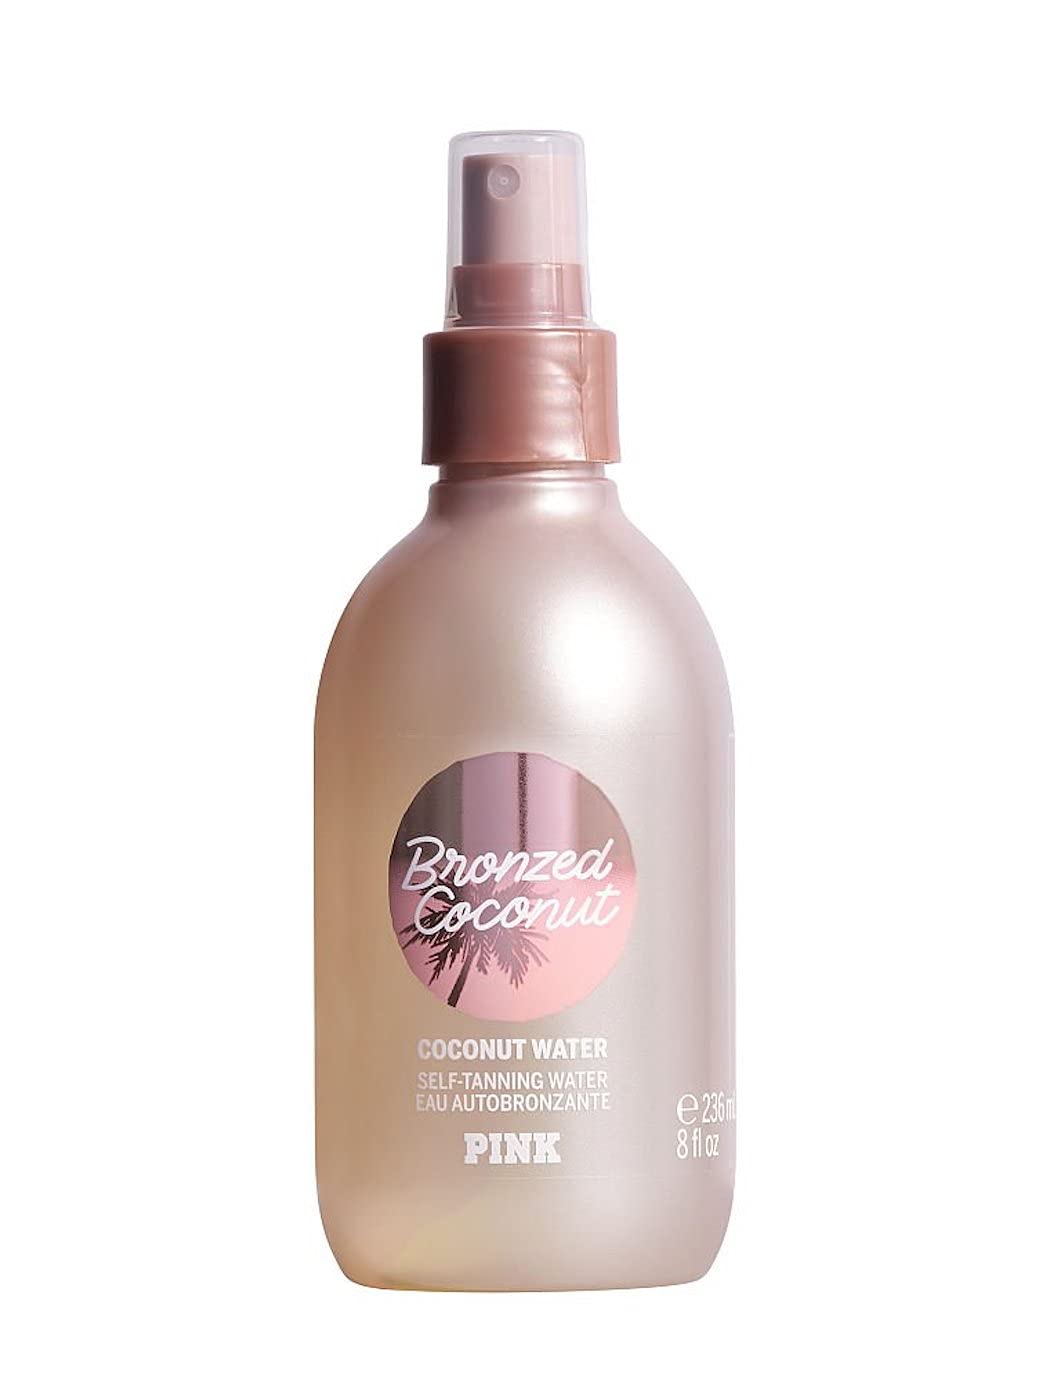 Victoria's Secret Bronzed Coconut Self-Tanning Water with Coconut Water